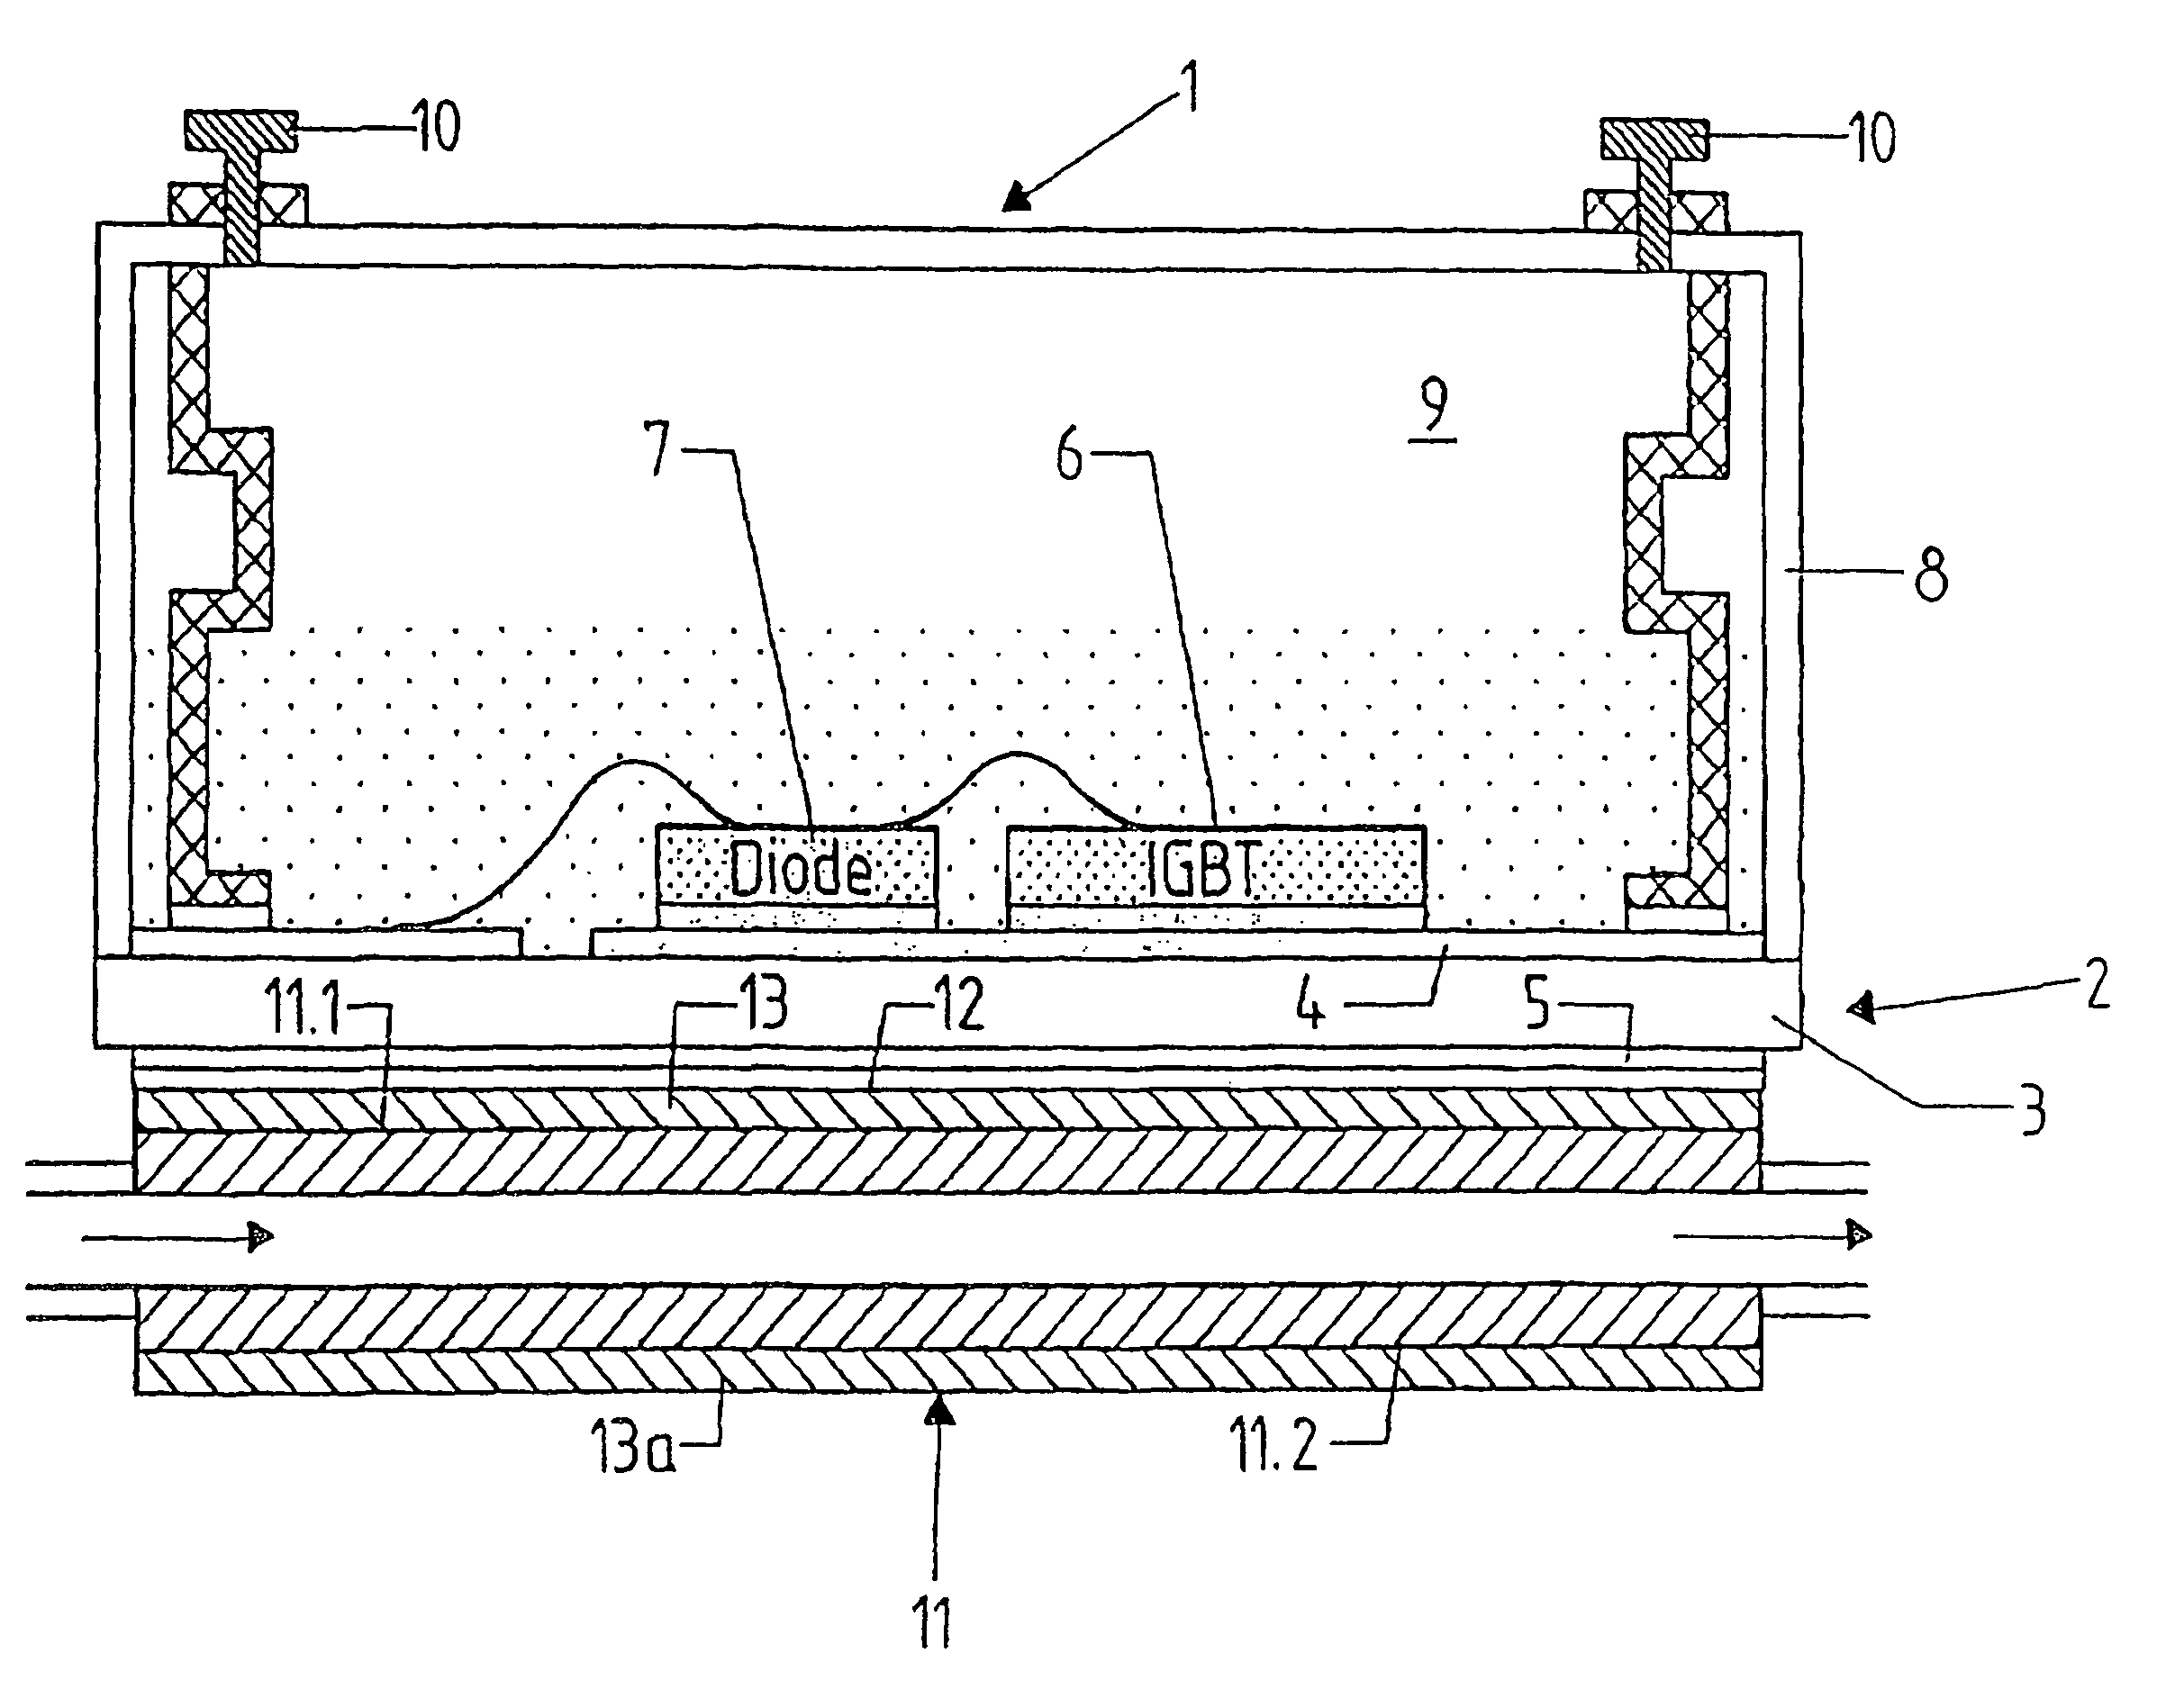 Heat sink and assembly or module unit